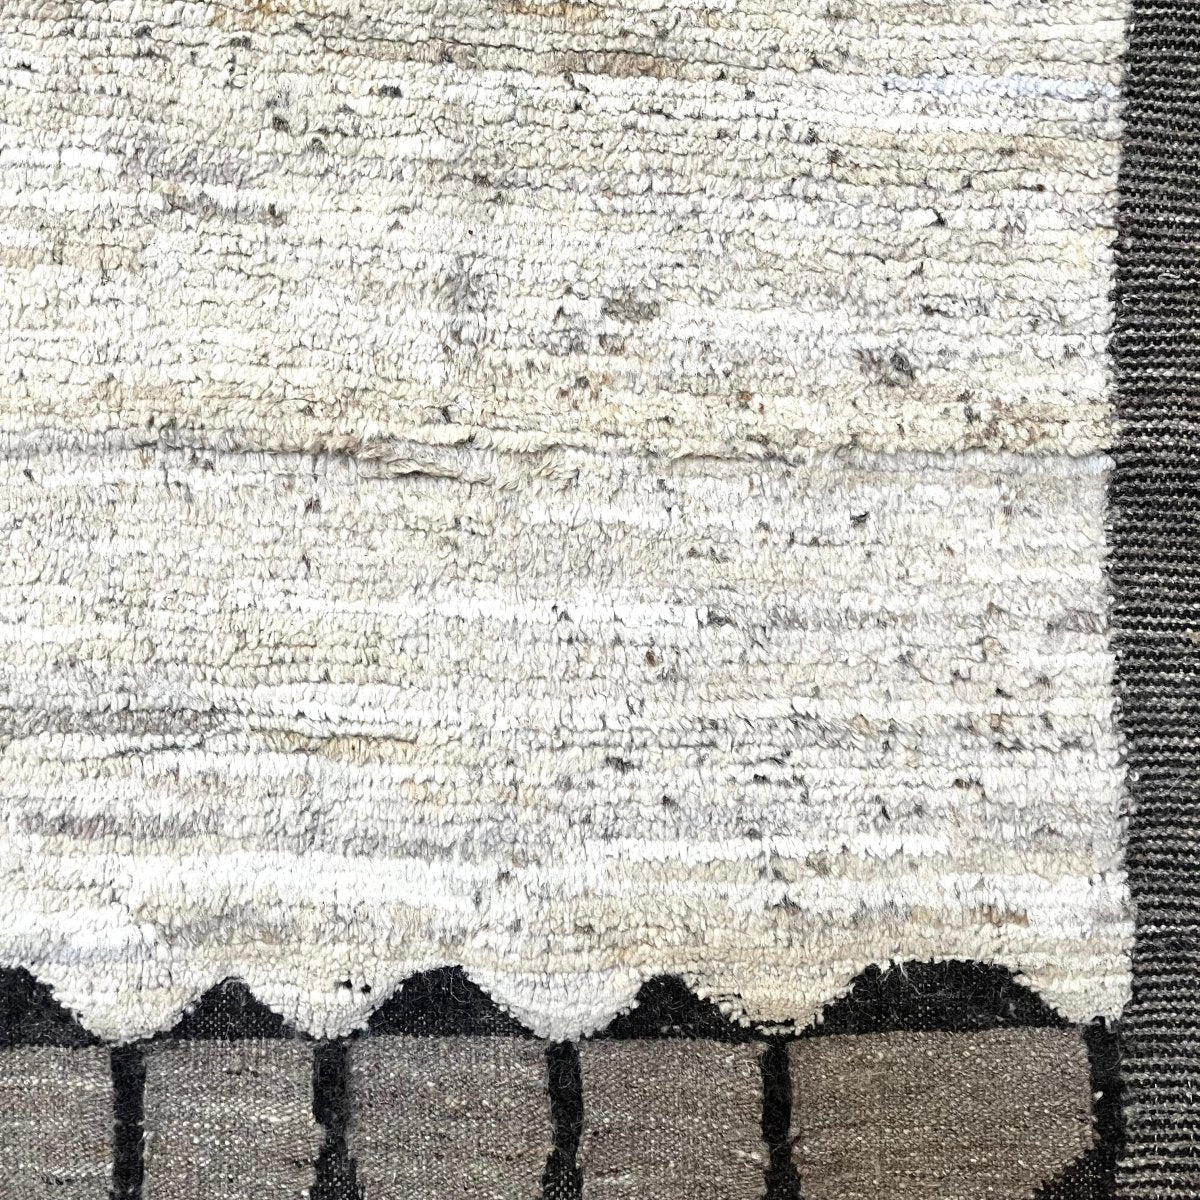 Wool Rug in Natural White with Light and Dark Brown Border/ Long Side Border Stripes/Short Side Border Triangles 6.9' x 9.3' - Homebody Denver